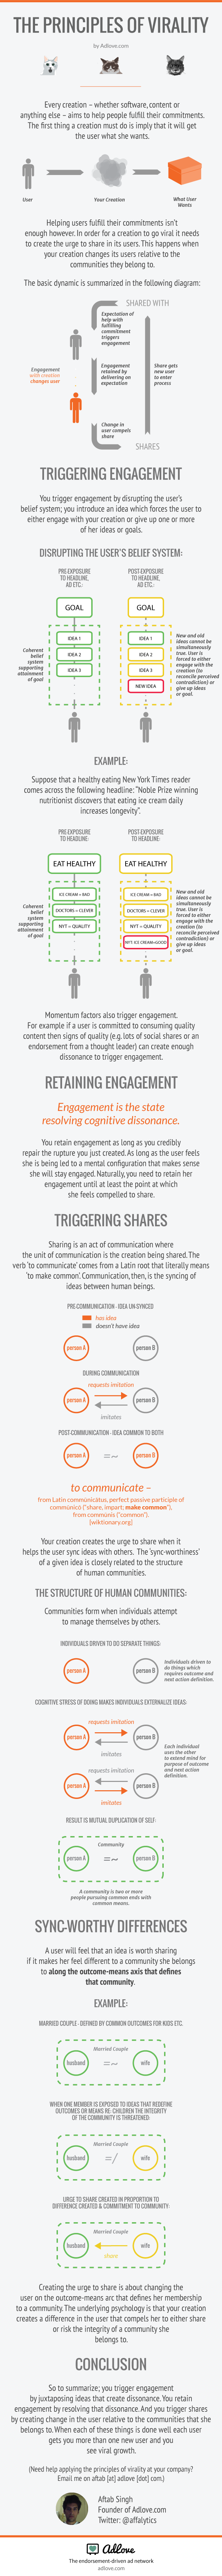 The Principles of Virality Infographic